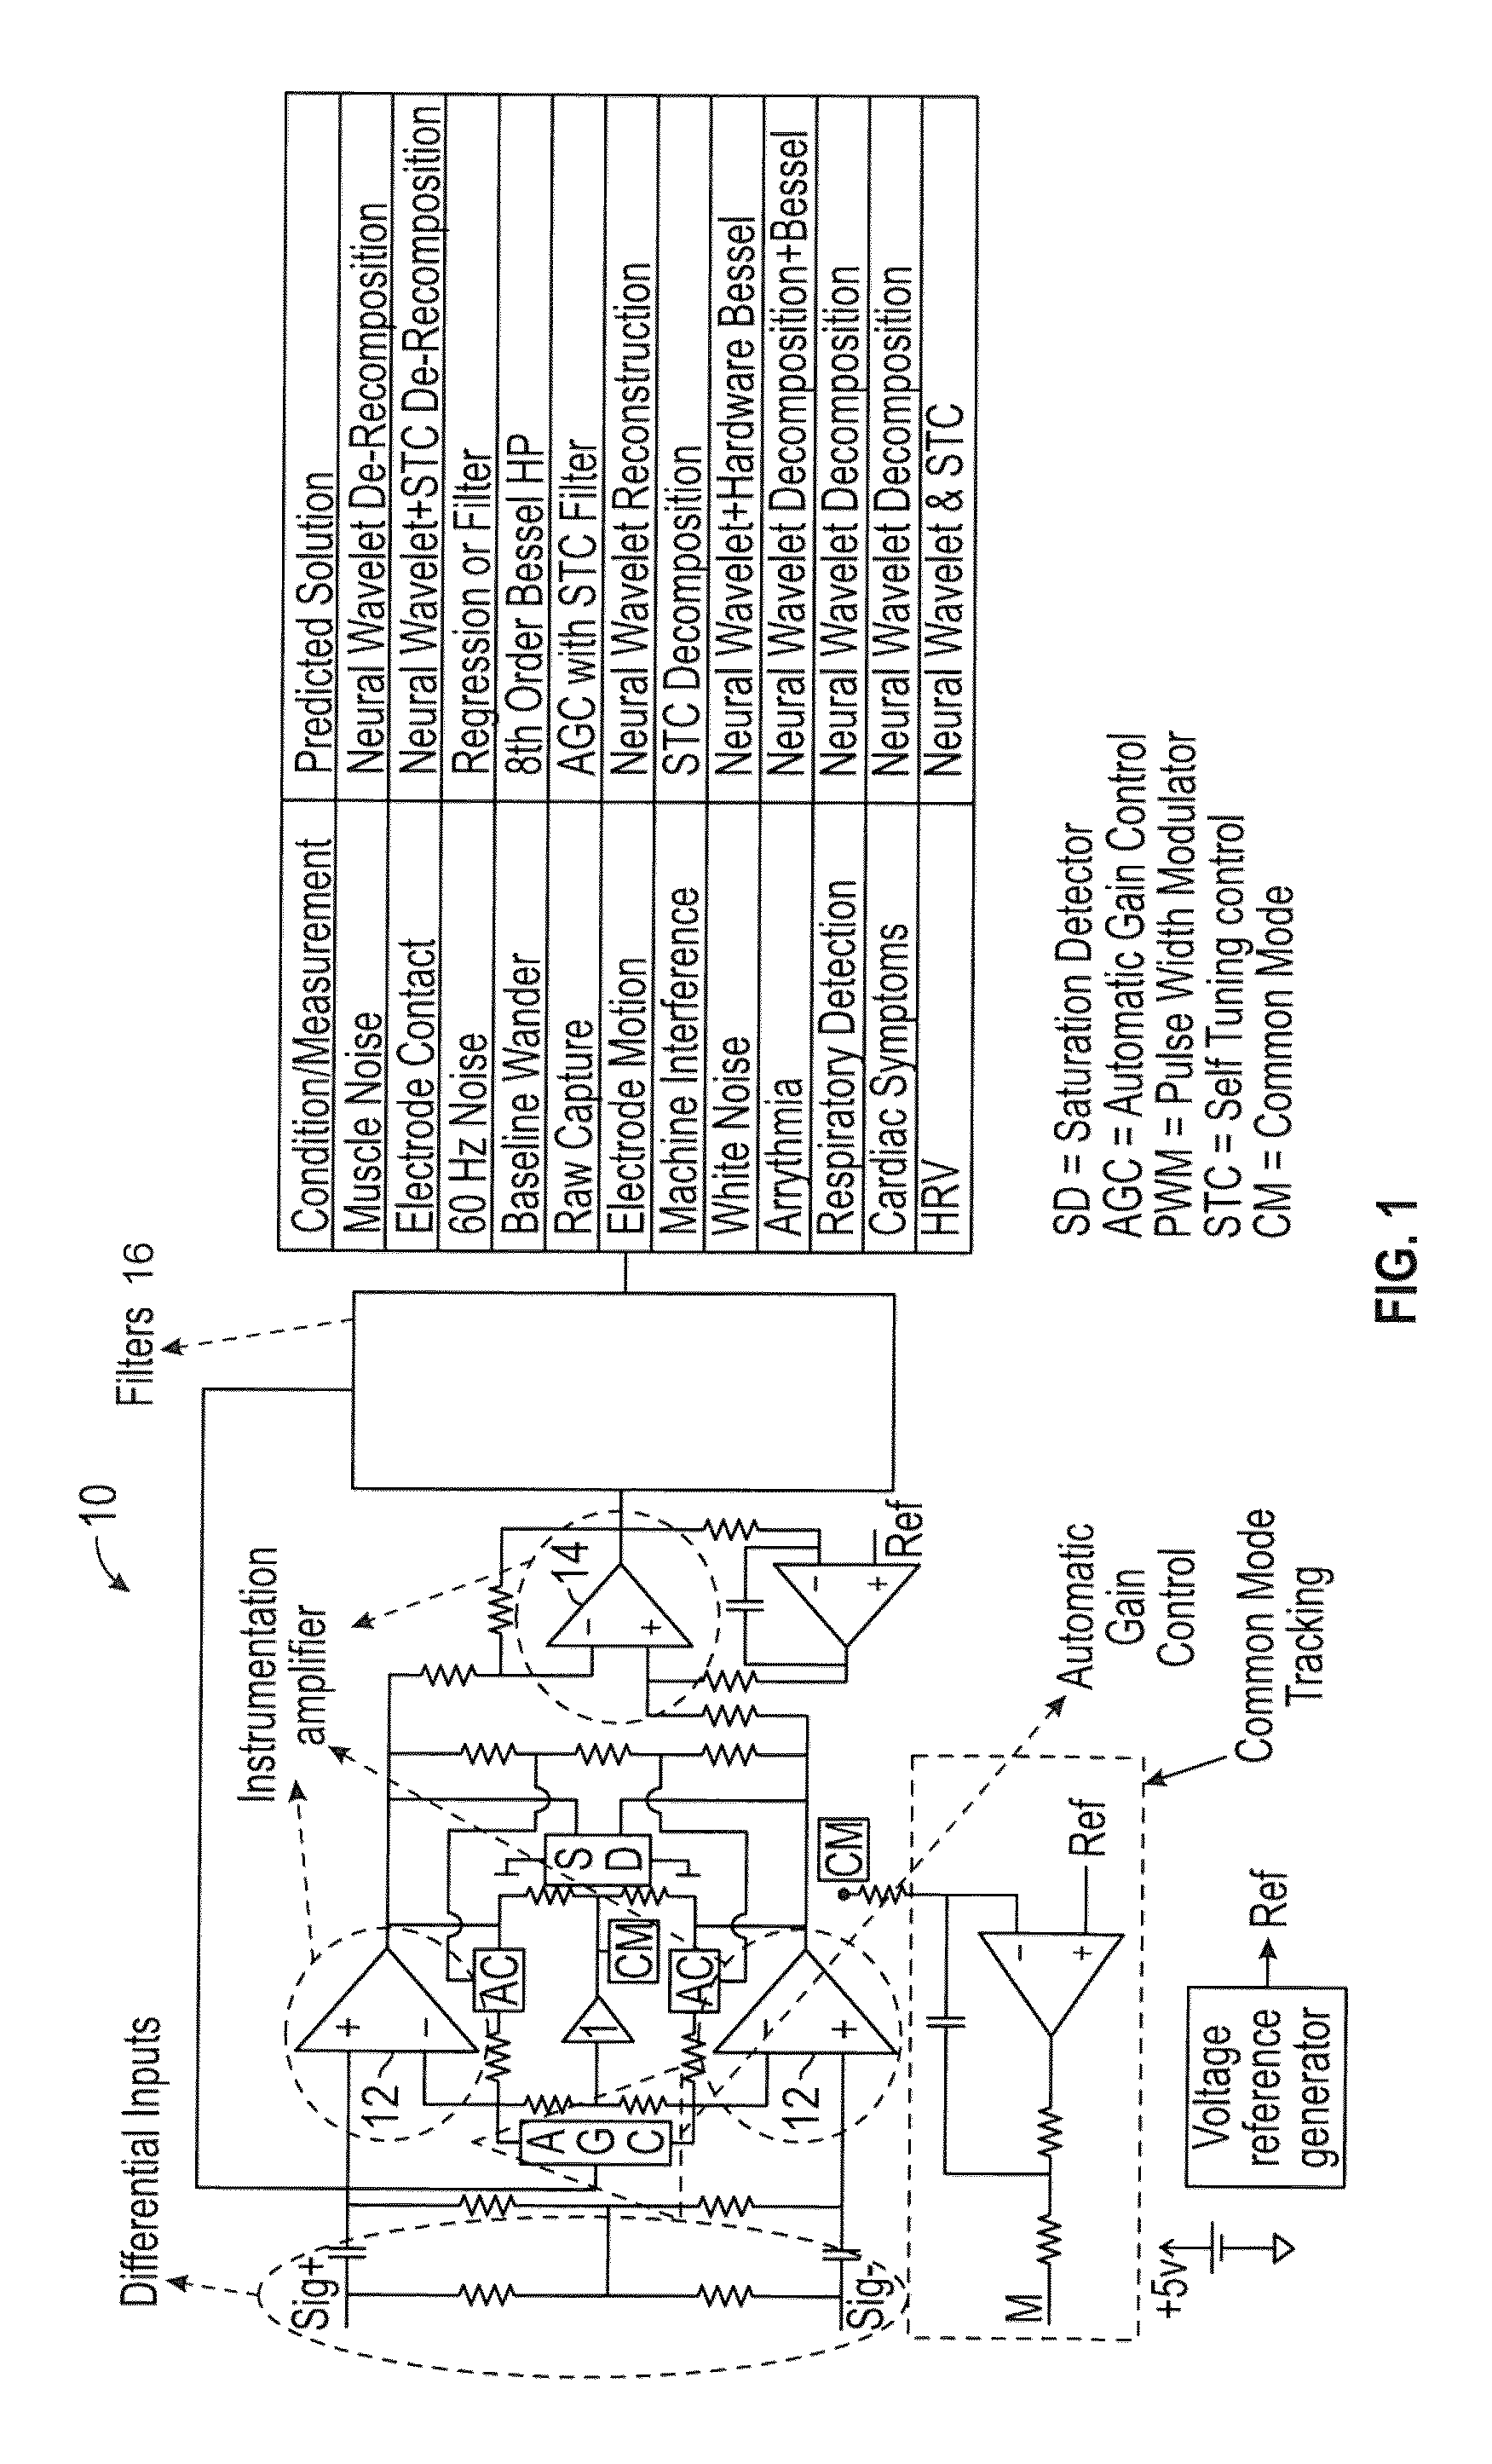 Heart rate extraction using neural wavelet adaptive gain control and neural pattern processing